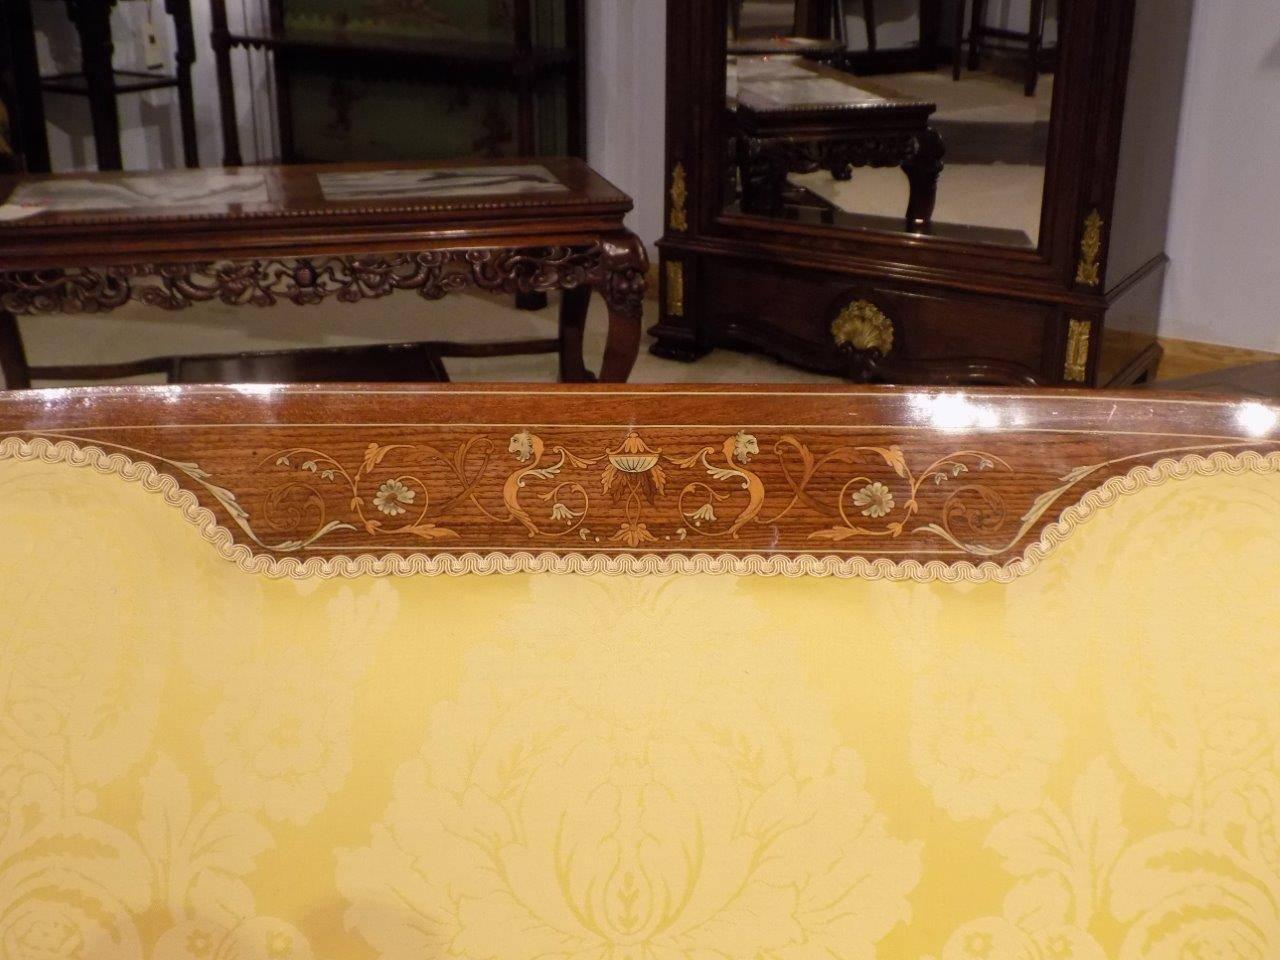 A fine quality mahogany, rosewood and marquetry inlaid Edwardian period sofa. The curved padded back with a fine classical marquetry and pen-work inlaid panel and string inlaid detail. Flanked by beautiful pierced and inlaid splats, with open arms